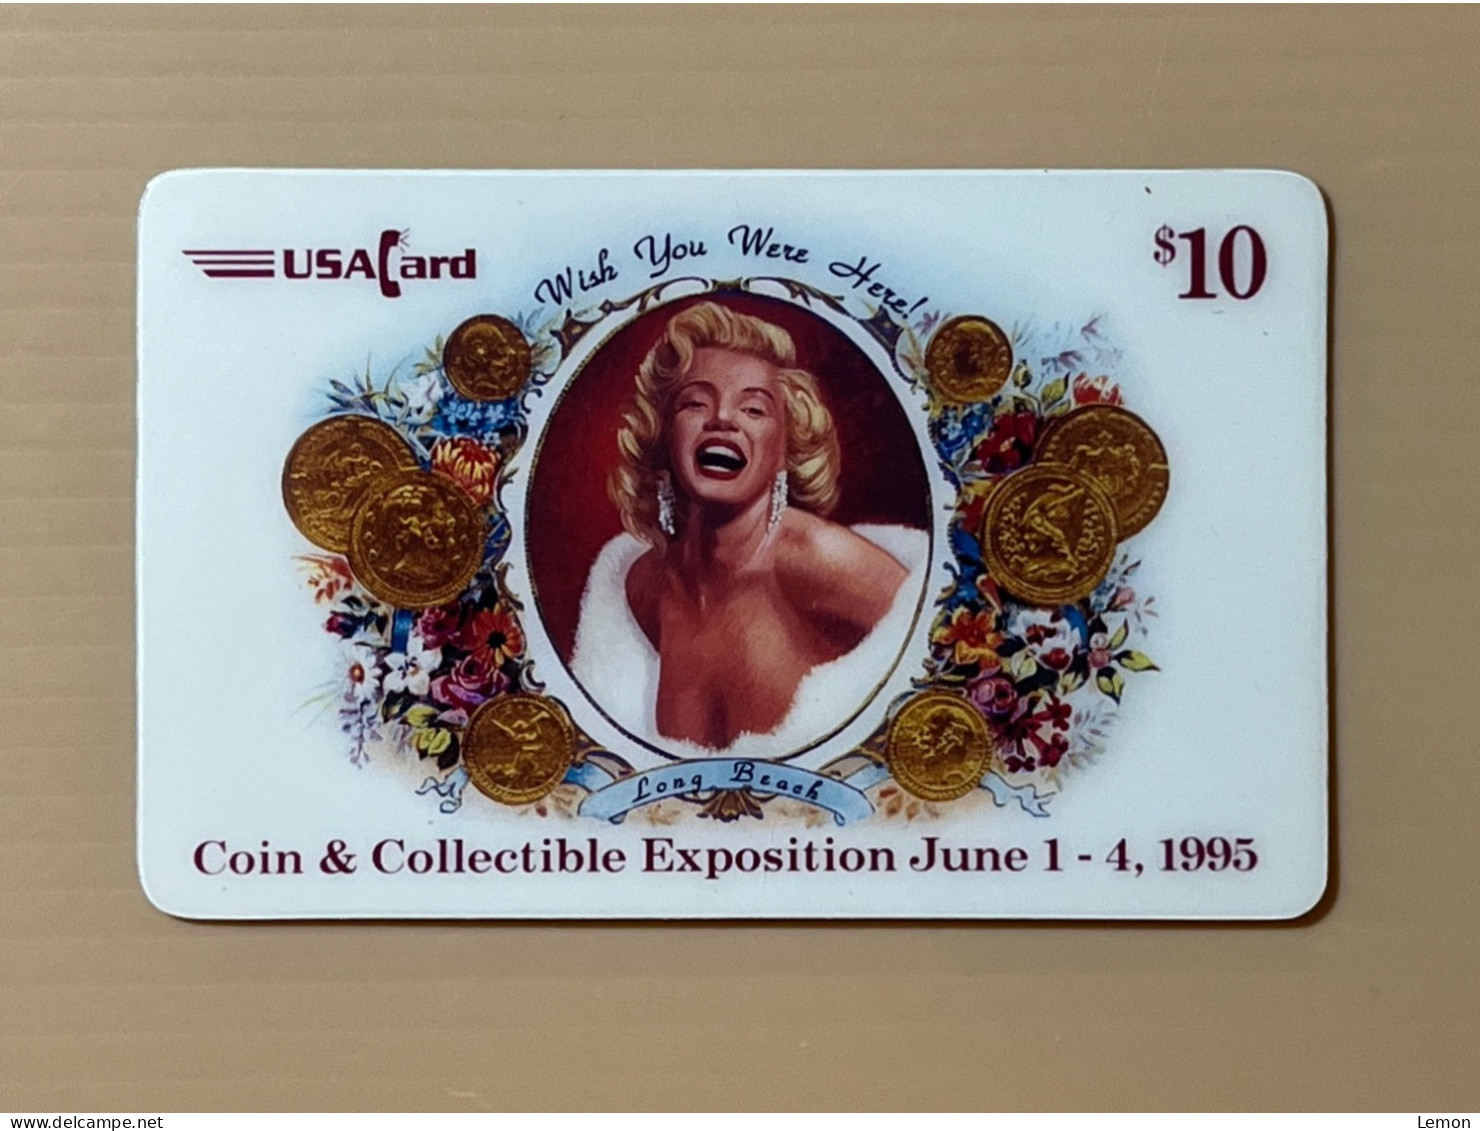 Mint USA UNITED STATES America Prepaid Telecard Phonecard, Coin & Collectible Expo 1995, Set Of 1 Mint Card With Folder - Collezioni